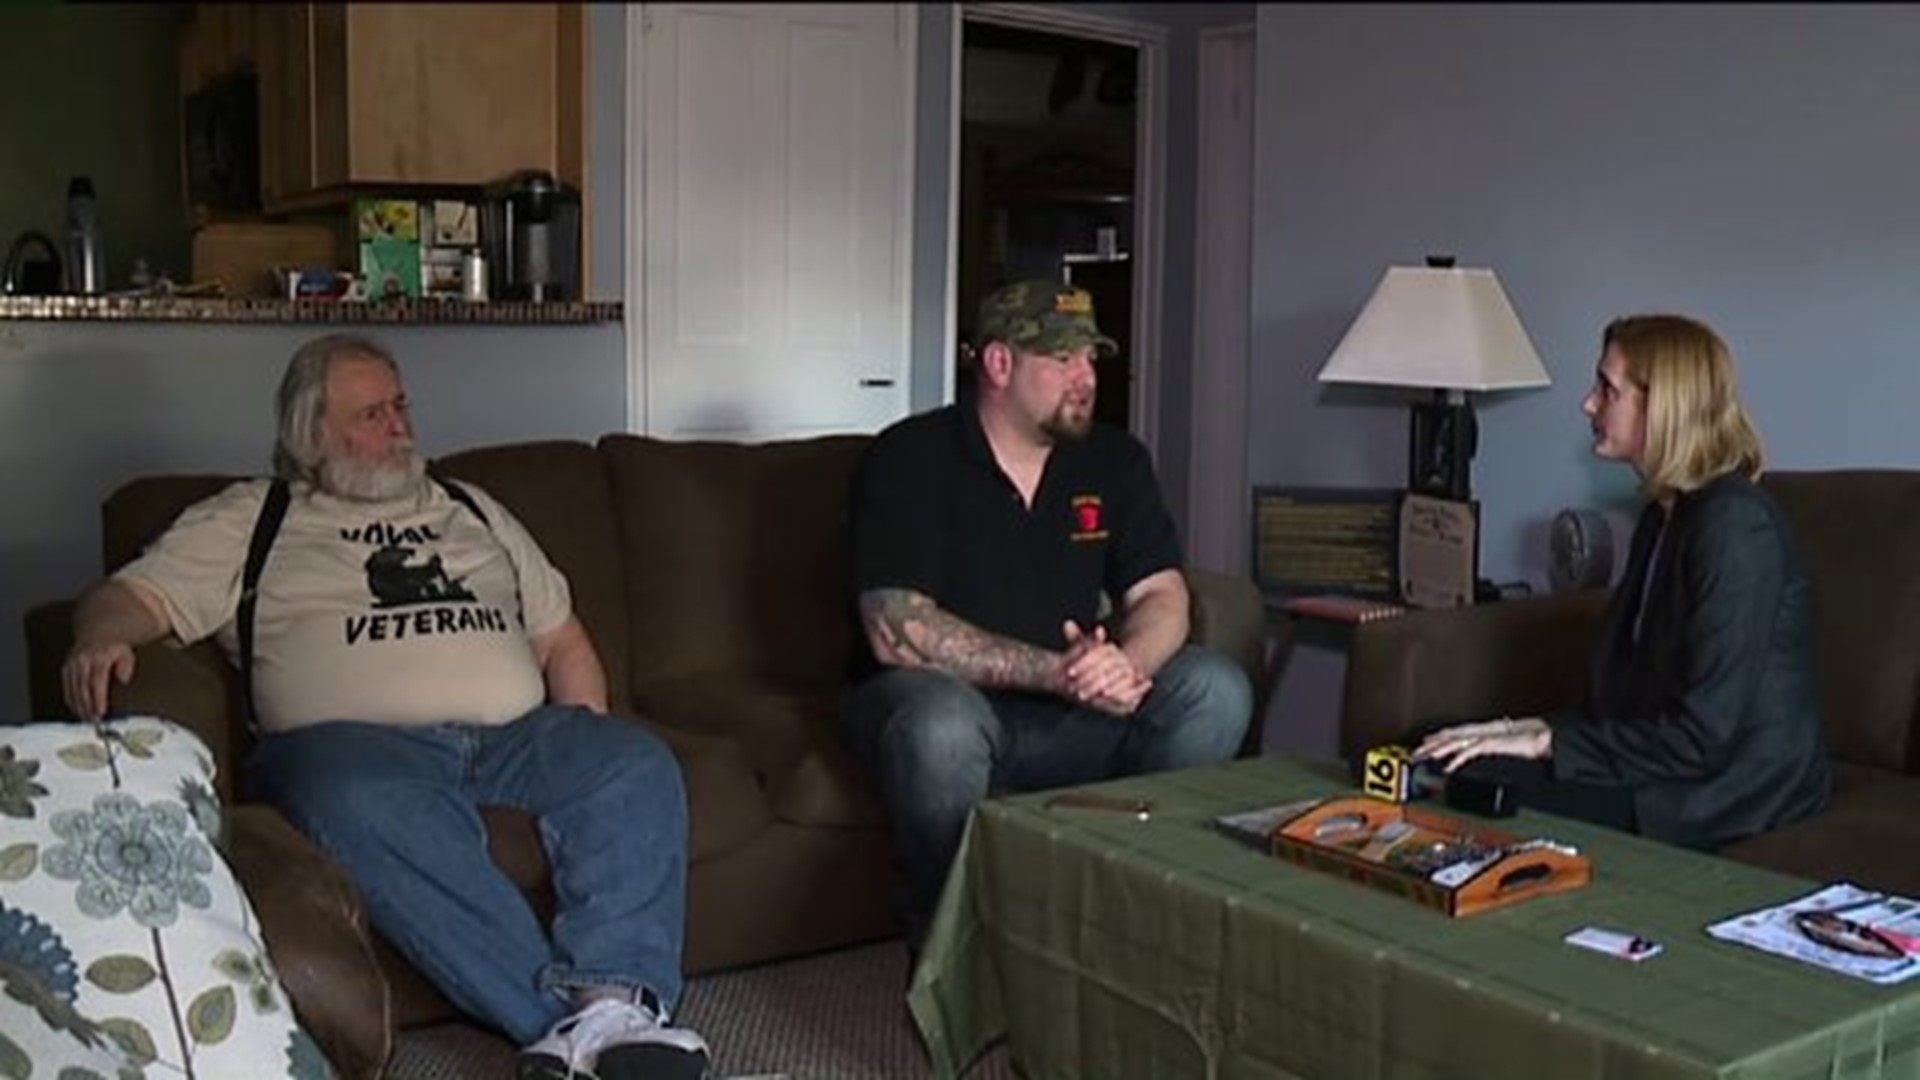 Local Vet with PTSD Reacts to Possibility of Medical Marijuana